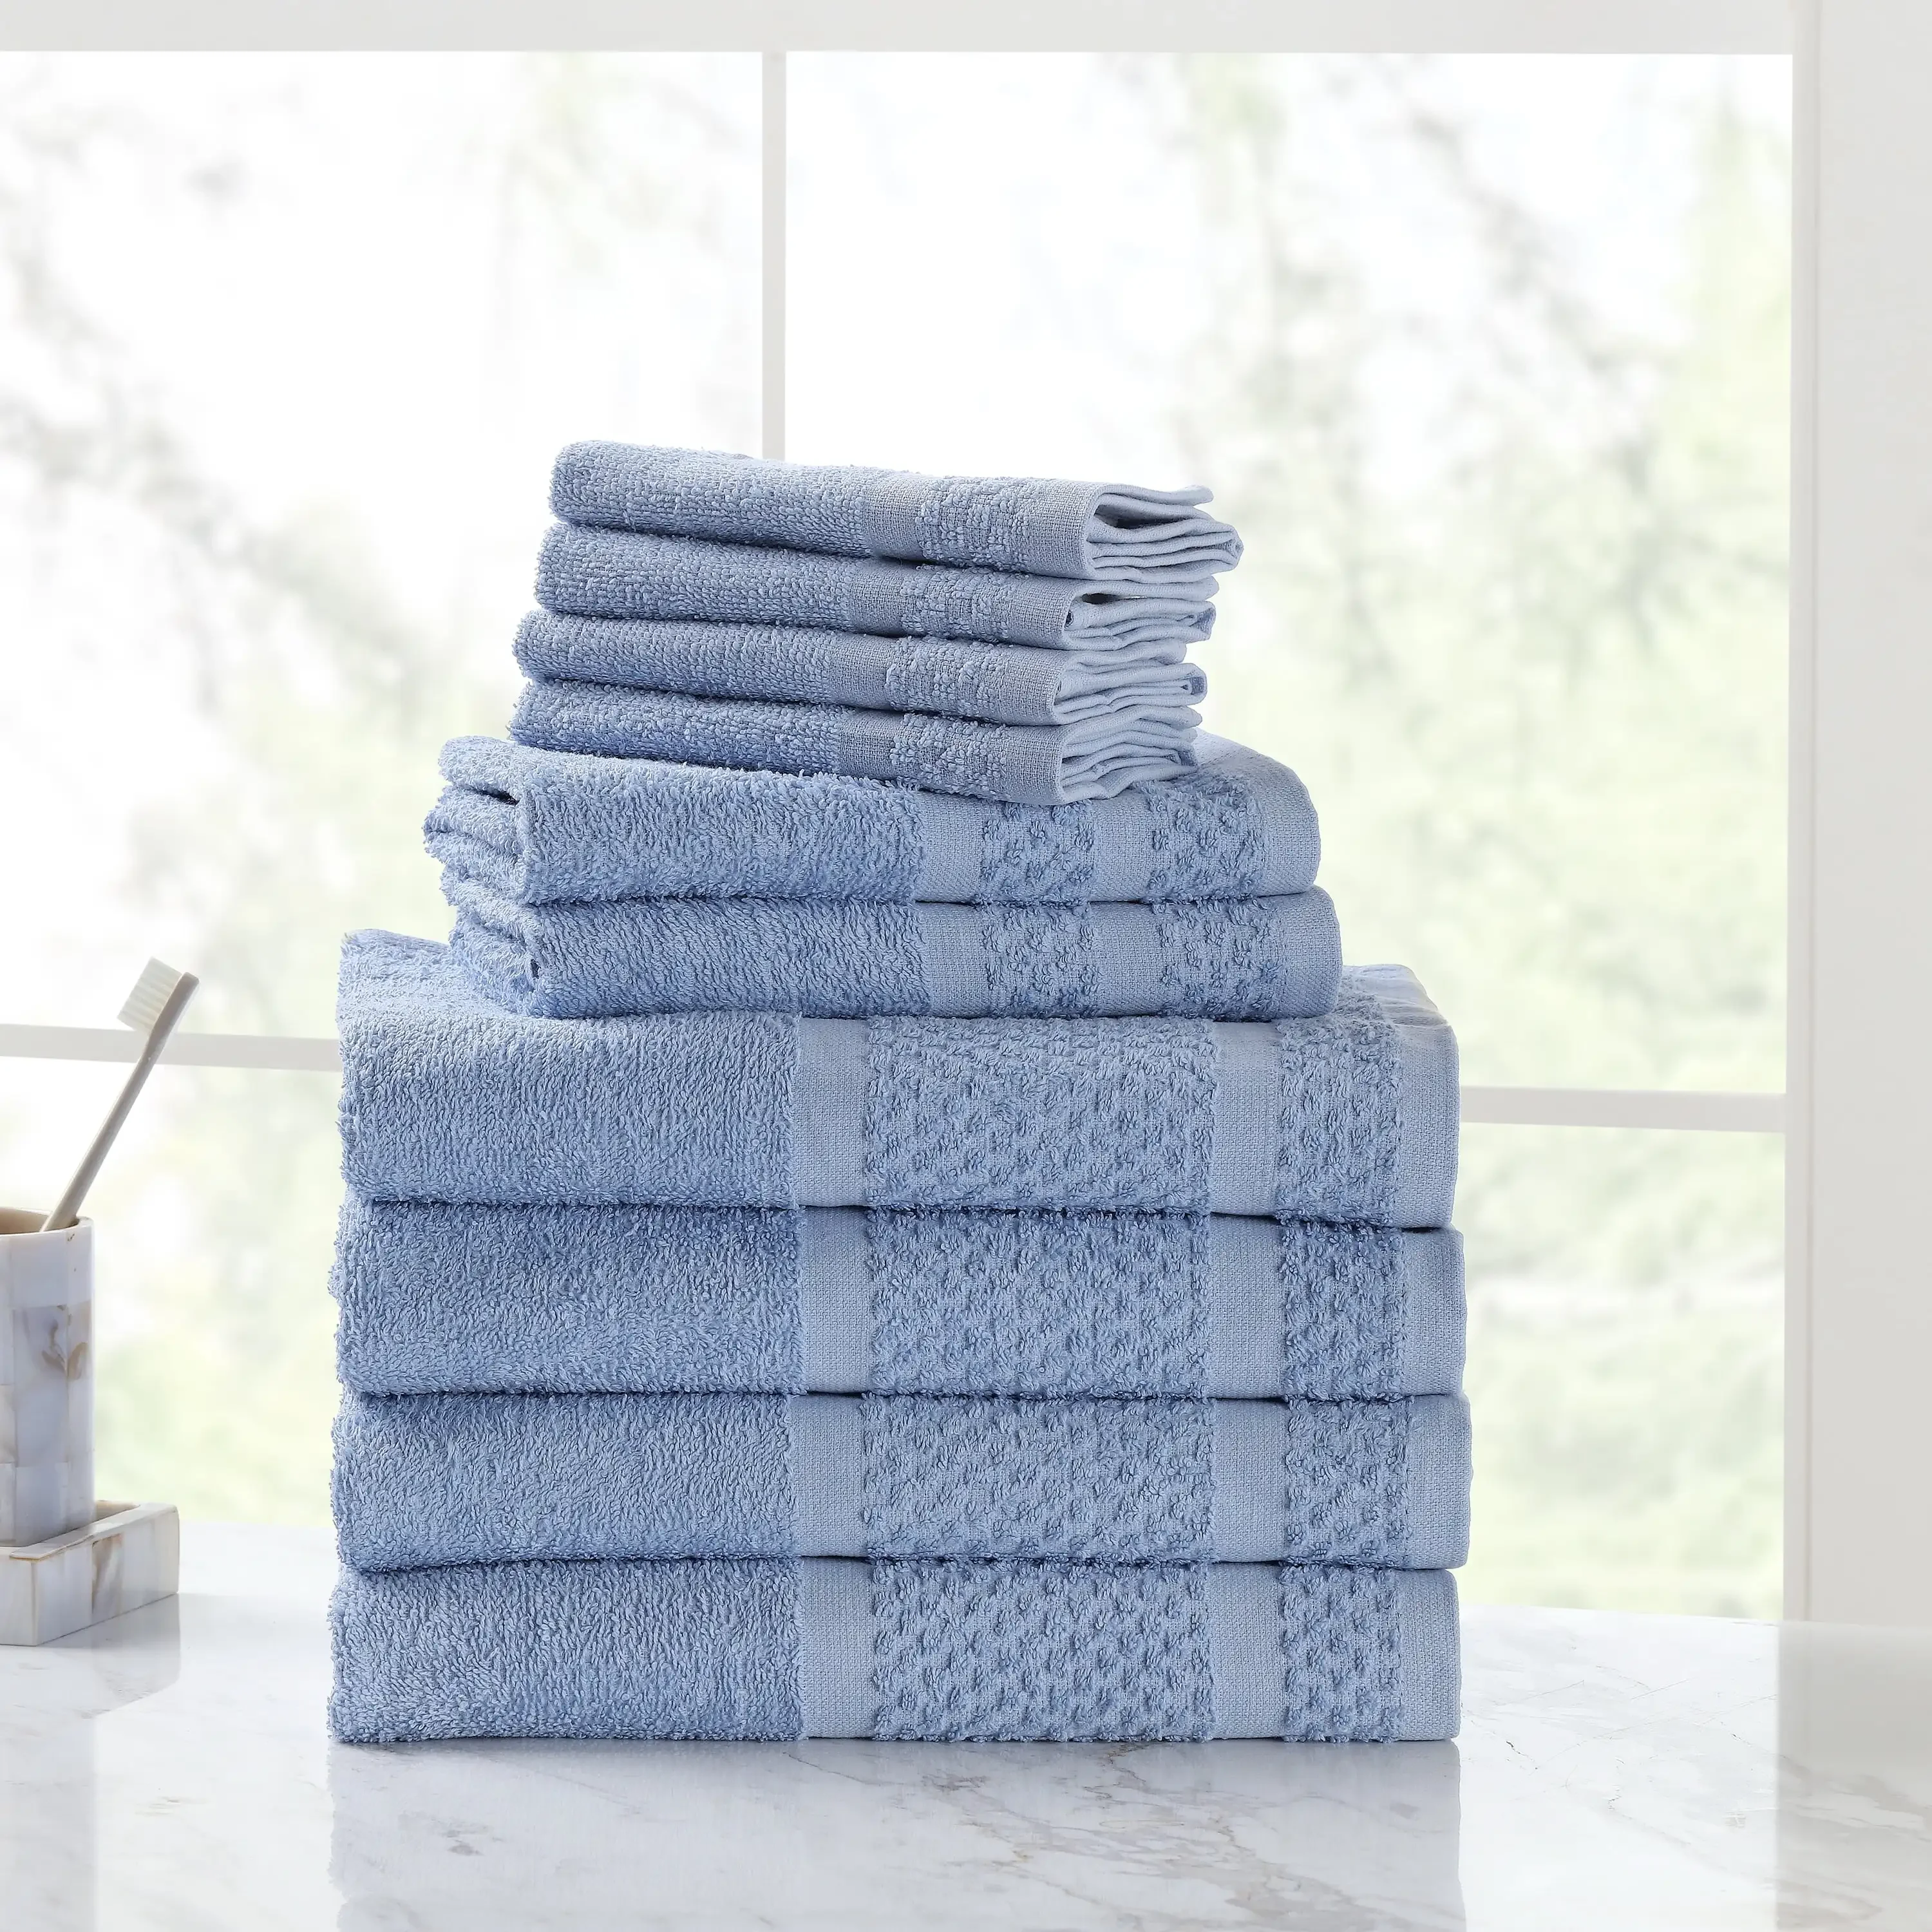 

Free Shipping 10 Piece Bath Towel Set with Upgraded Softness & Durability, Office Blue